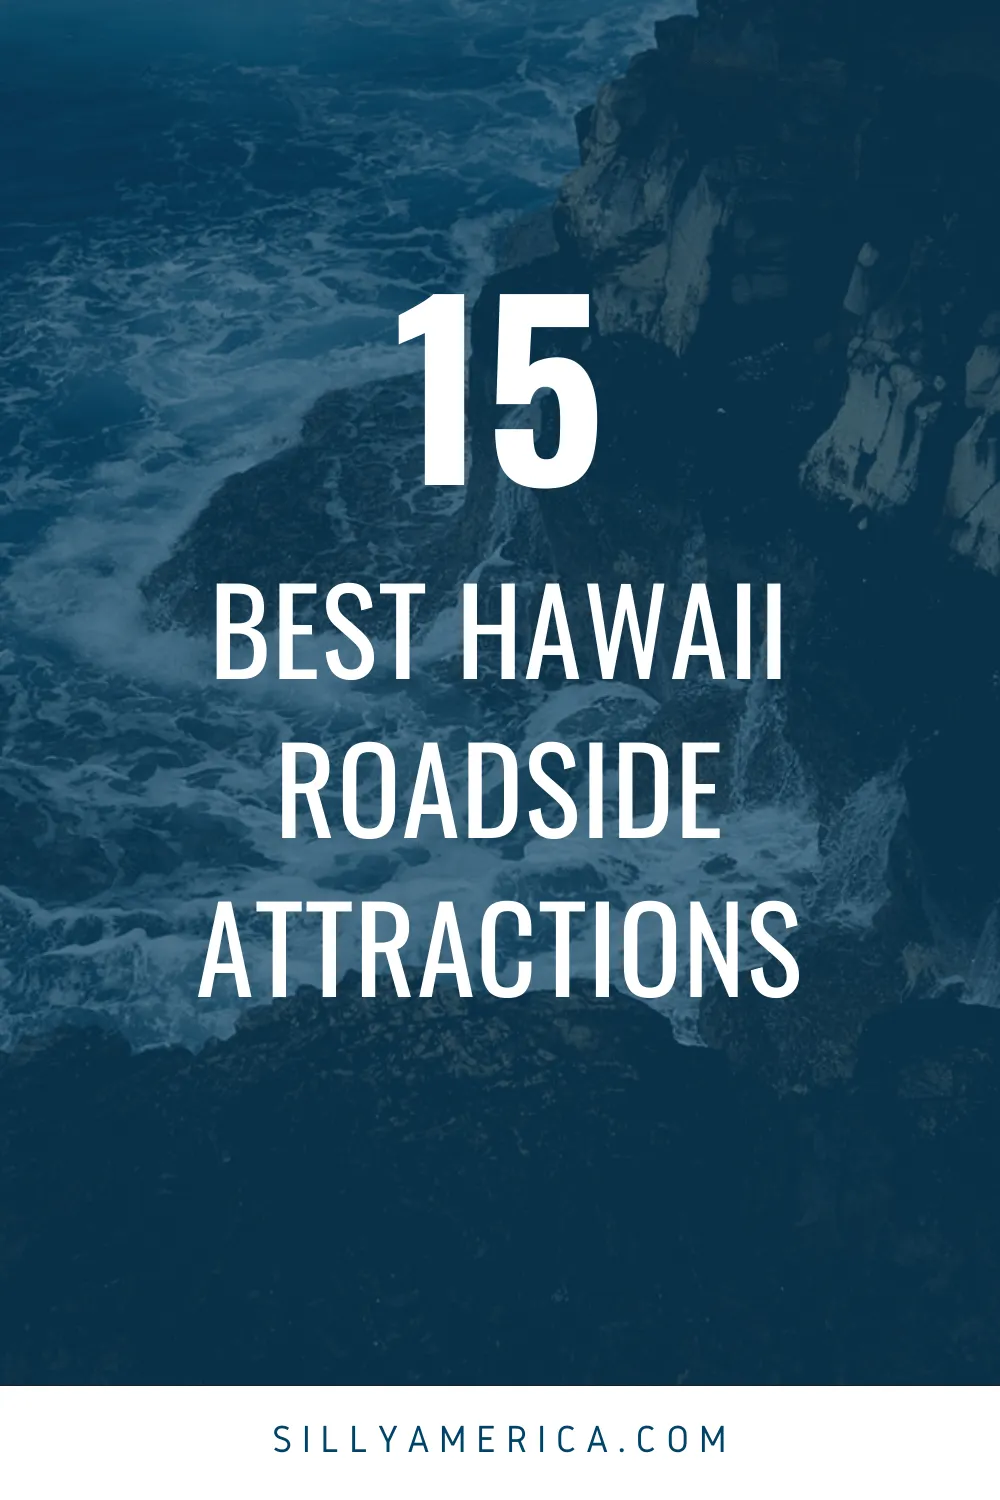 The best Hawaii roadside attractions to visit on a Hawaii road trip or vacation. Add these roadside oddities to your travel bucket list or itinerary! Whether you’re hitting the beaches of Maui or Oahu, exploring the scenery of Kauai, or road tripping to the volcanoes of the Big Island, you won’t want to miss these fifteen must-see places to go in Hawaii. #HawaiiRoadsideAttractions #HawaiiRoadsideAttraction #RoadsideAttractions #RoadsideAttraction #RoadTrip #HawaiiRoadTrip #HawaiiBucketLists